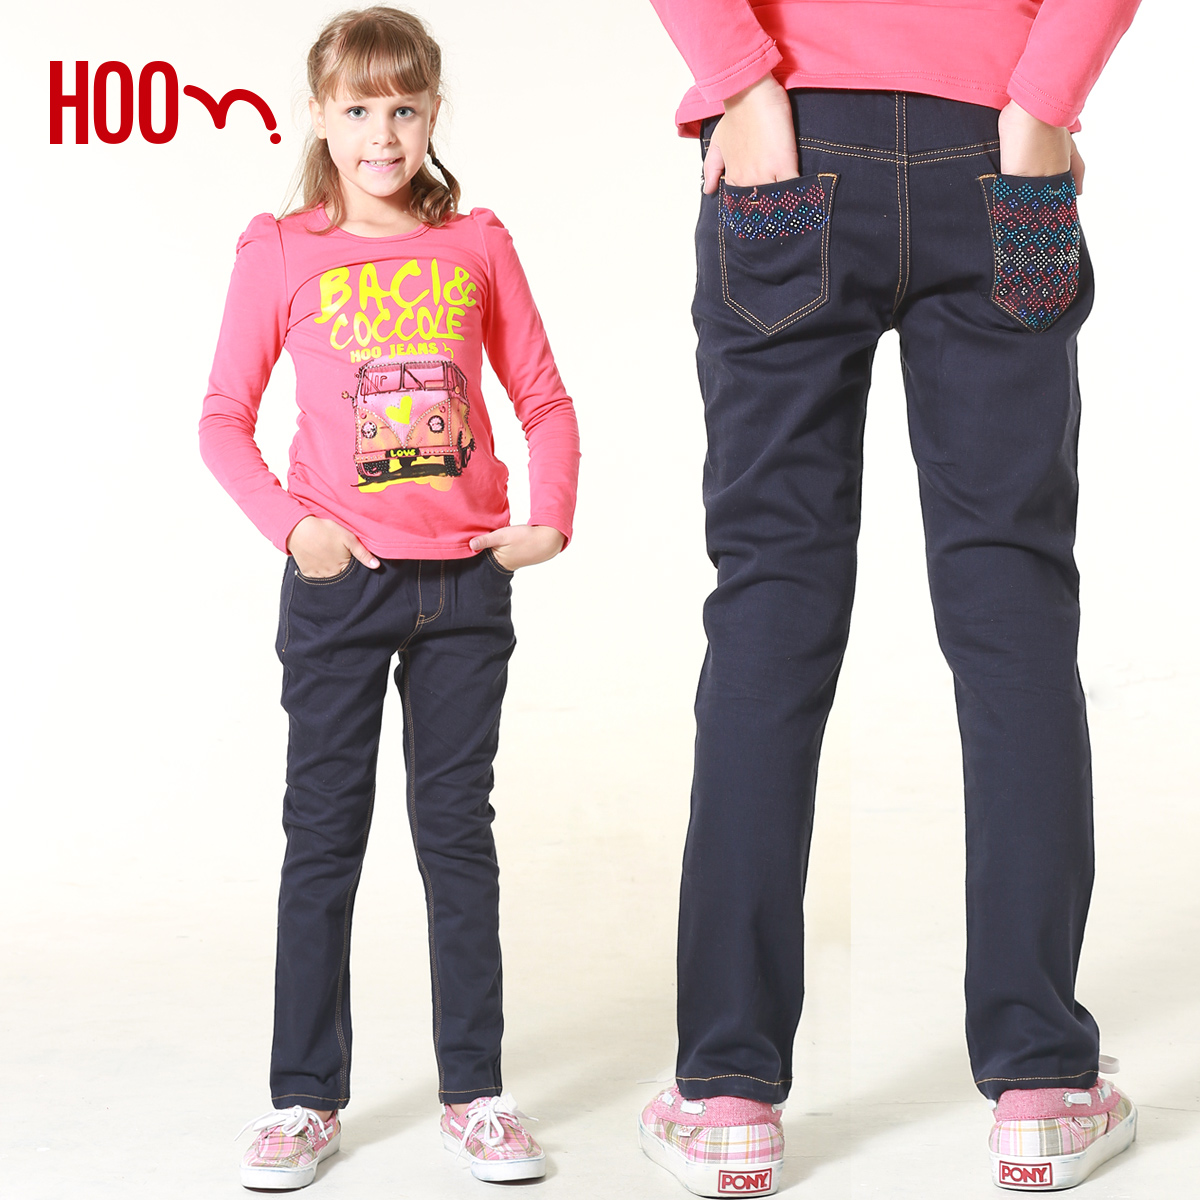 Download this Autumn New Arrival Hoo... picture